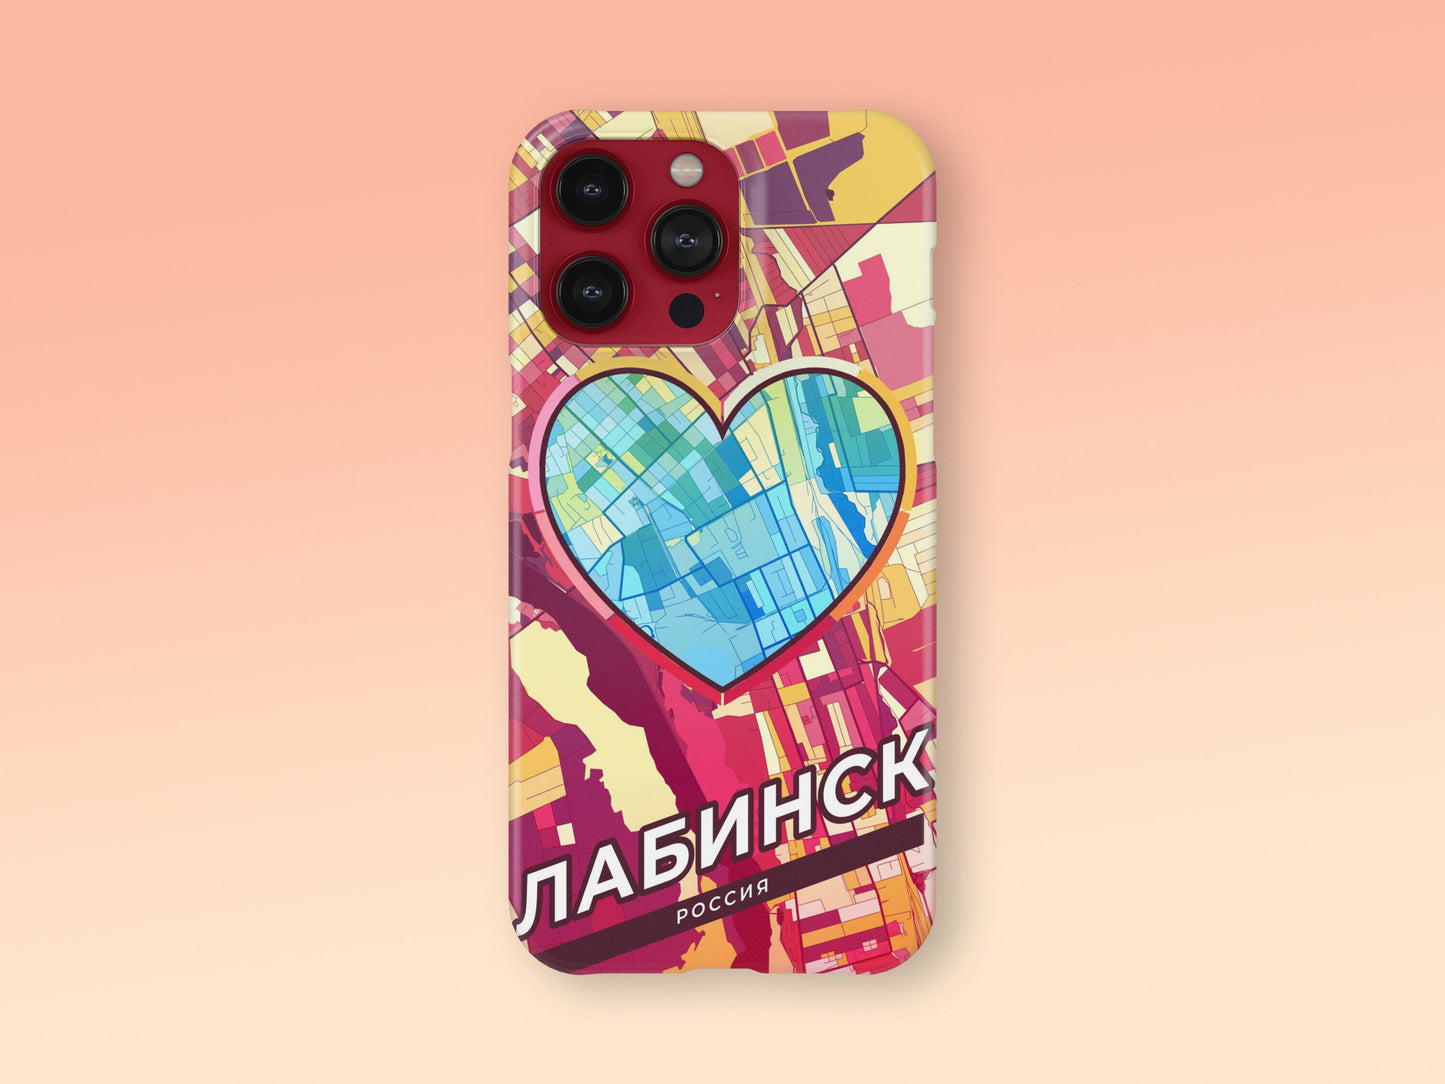 Labinsk Russia slim phone case with colorful icon. Birthday, wedding or housewarming gift. Couple match cases. 2